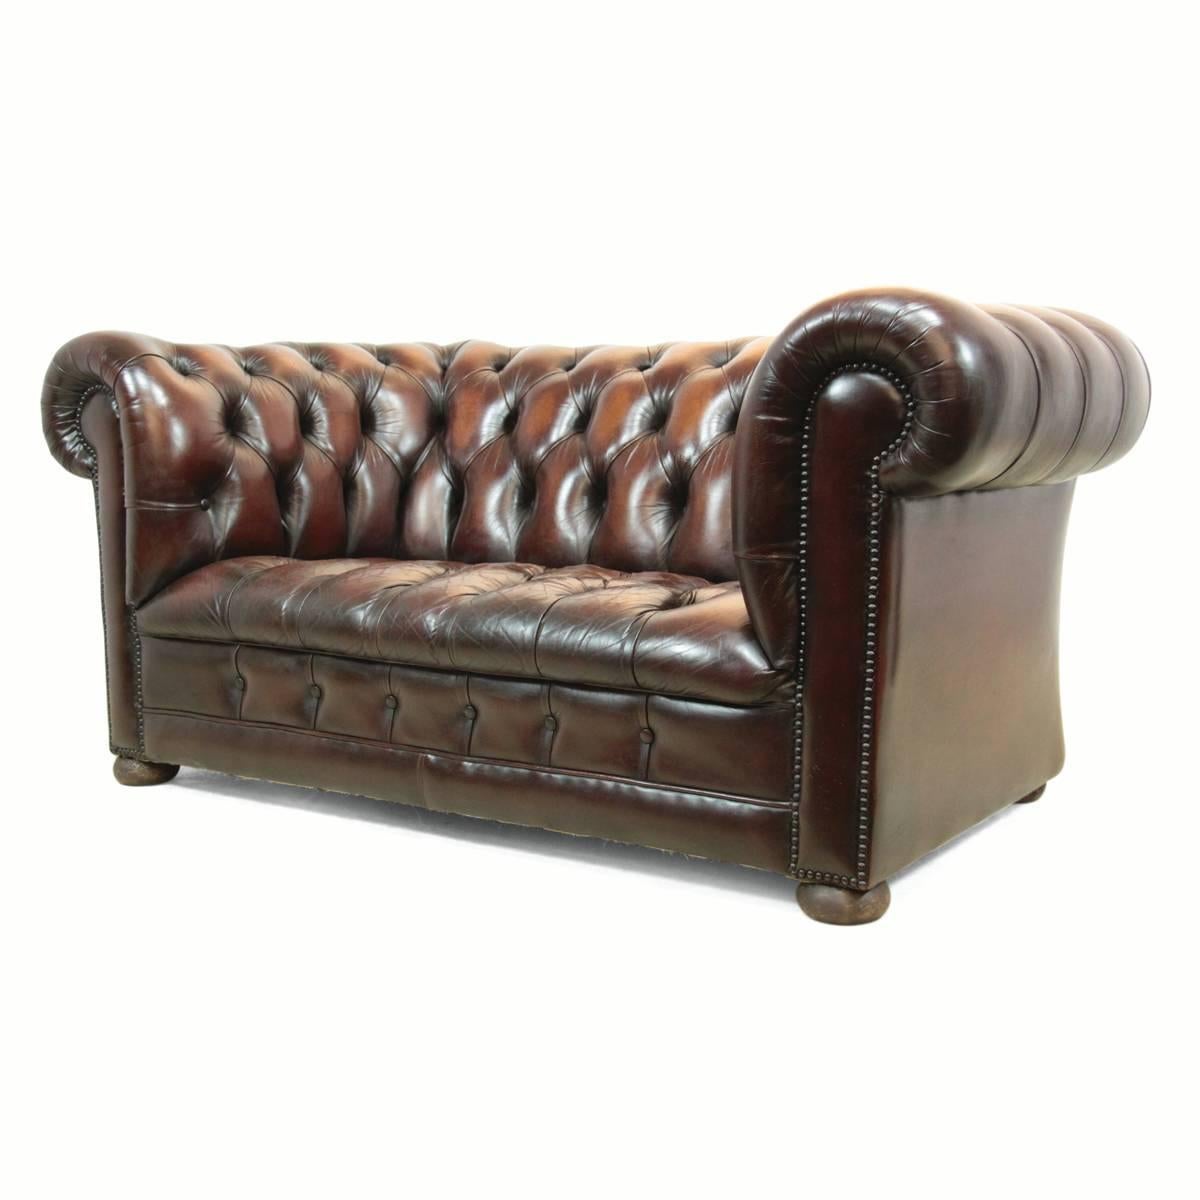 Vintage Leather Chesterfield.
This brown leather Chesterfield is a chestnut color, benefiting from a full buttoned seat and buttoned back. Produced in the 1970s using hard wood for the frame and a fully sprung seat, it is a nice comfortable